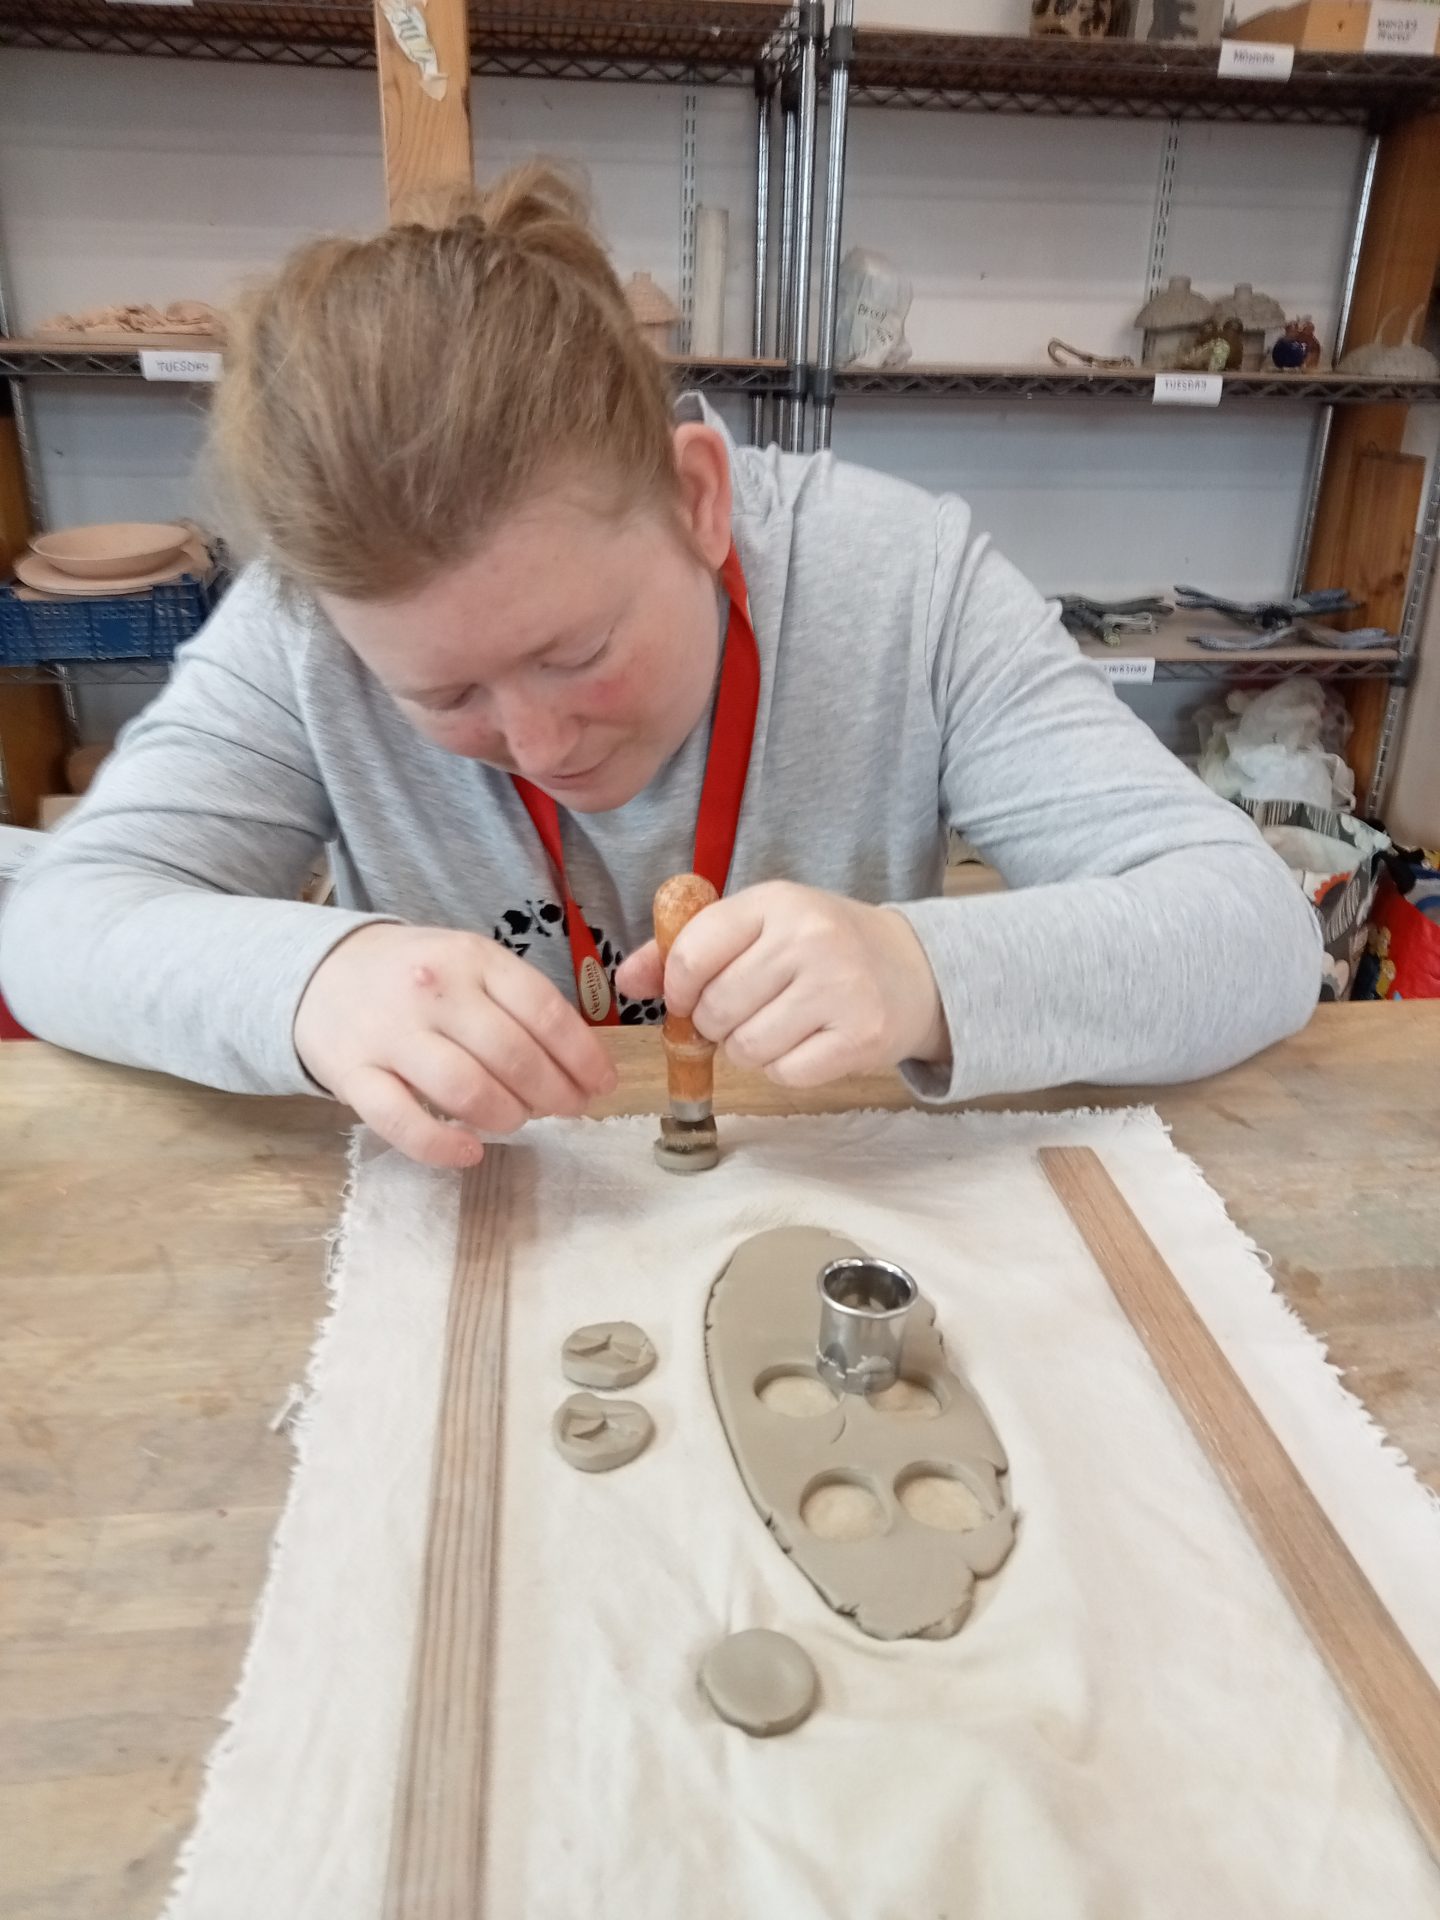 Imprinting the angel in clay